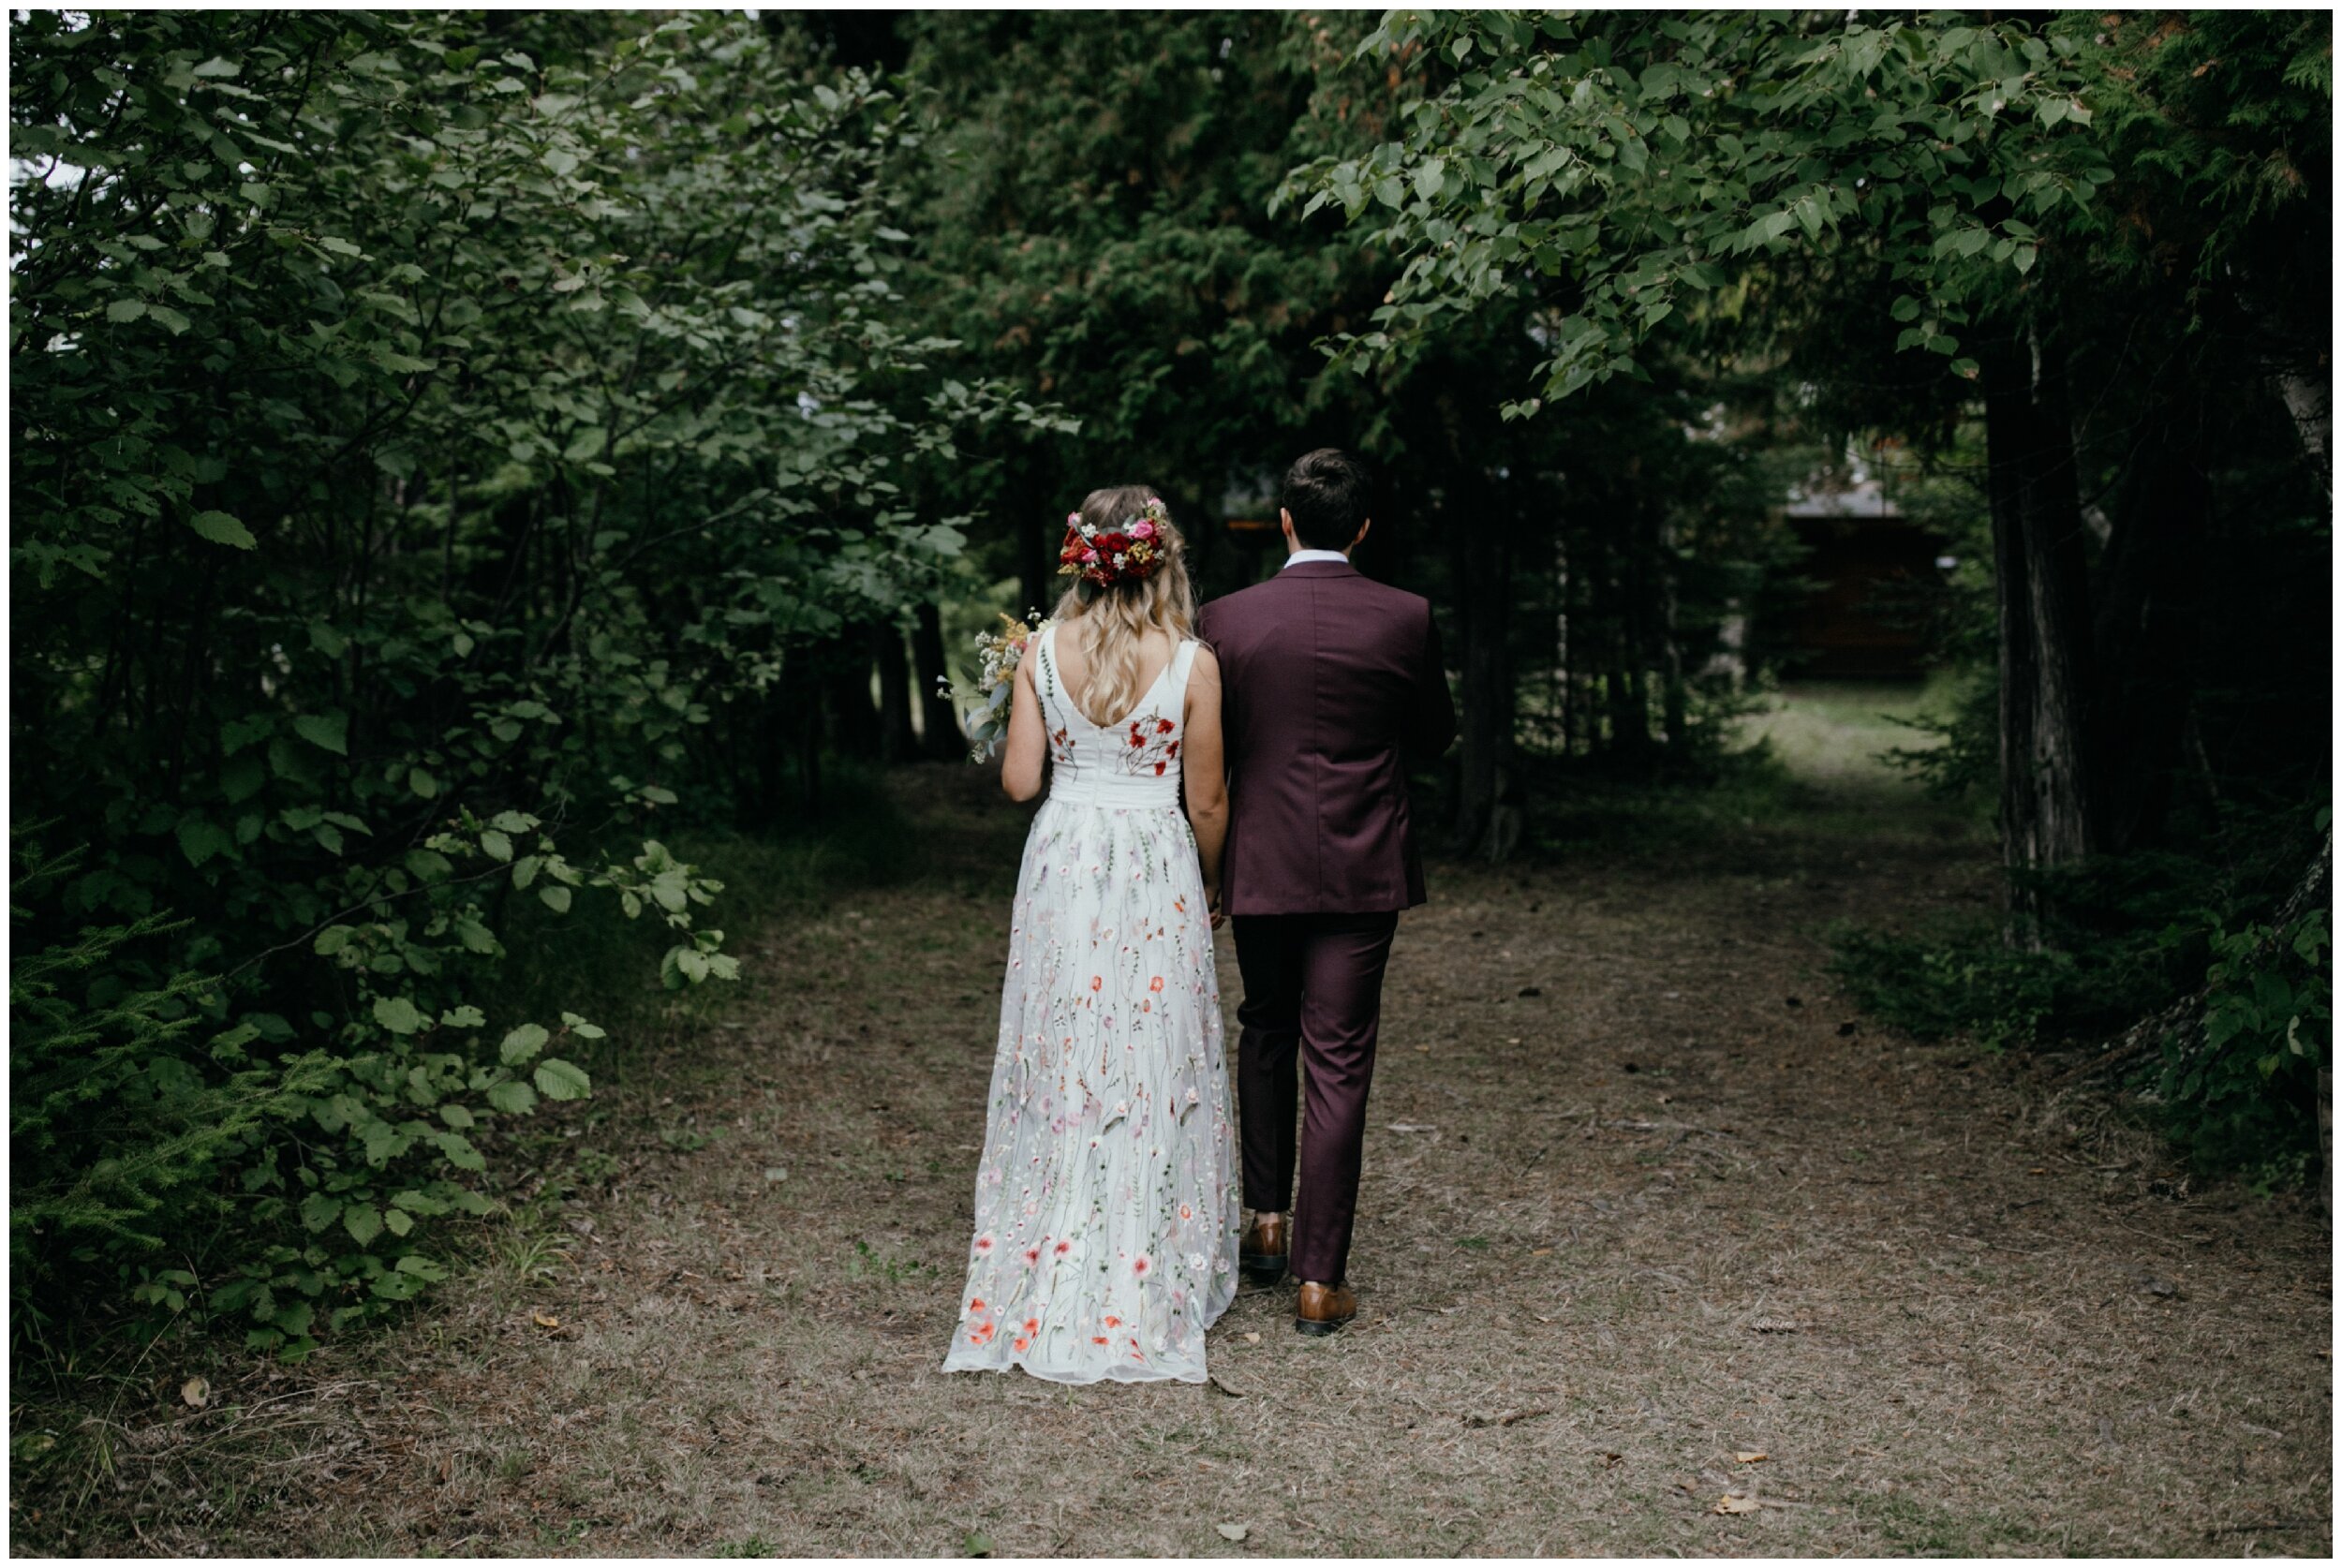 Bride and groom walking together after Minnesota summer camp wedding in the woods